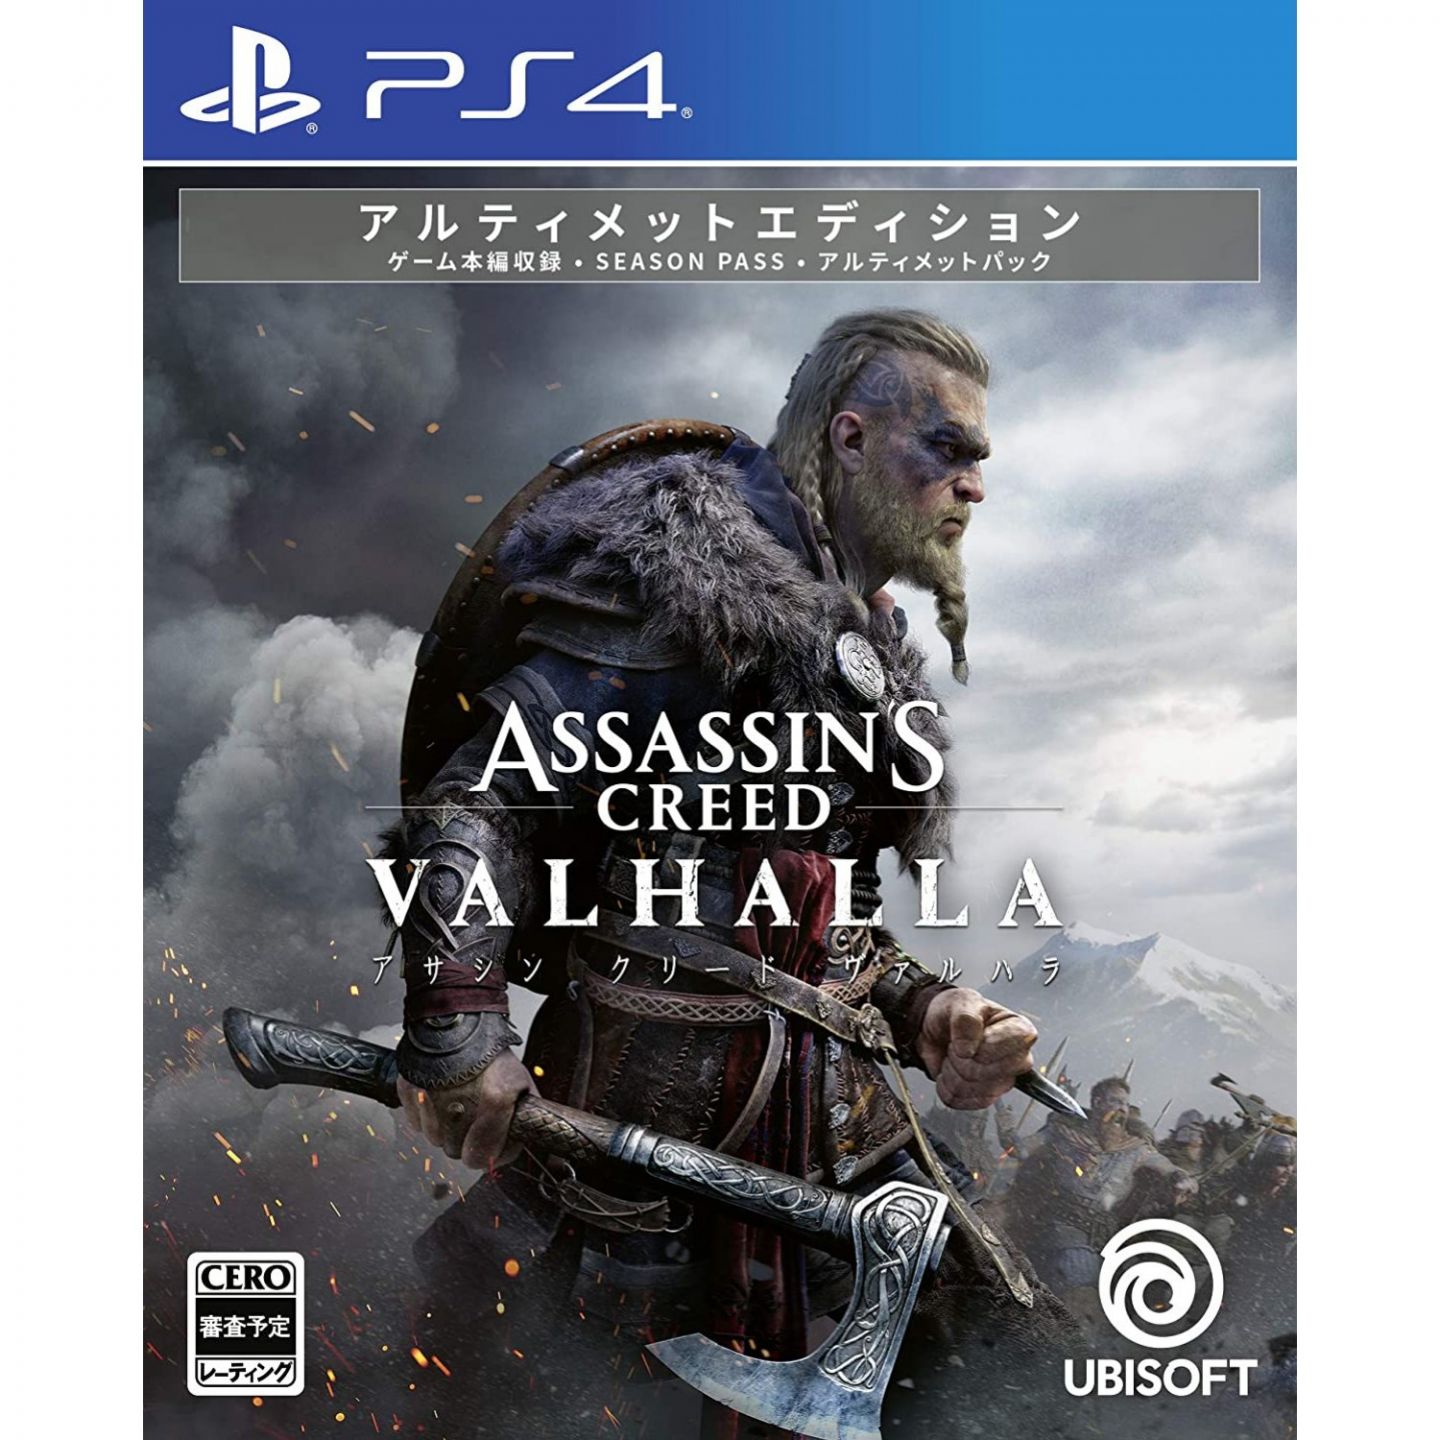 Assassin's Creed Valhalla - Complete Edition - PlayStation 5